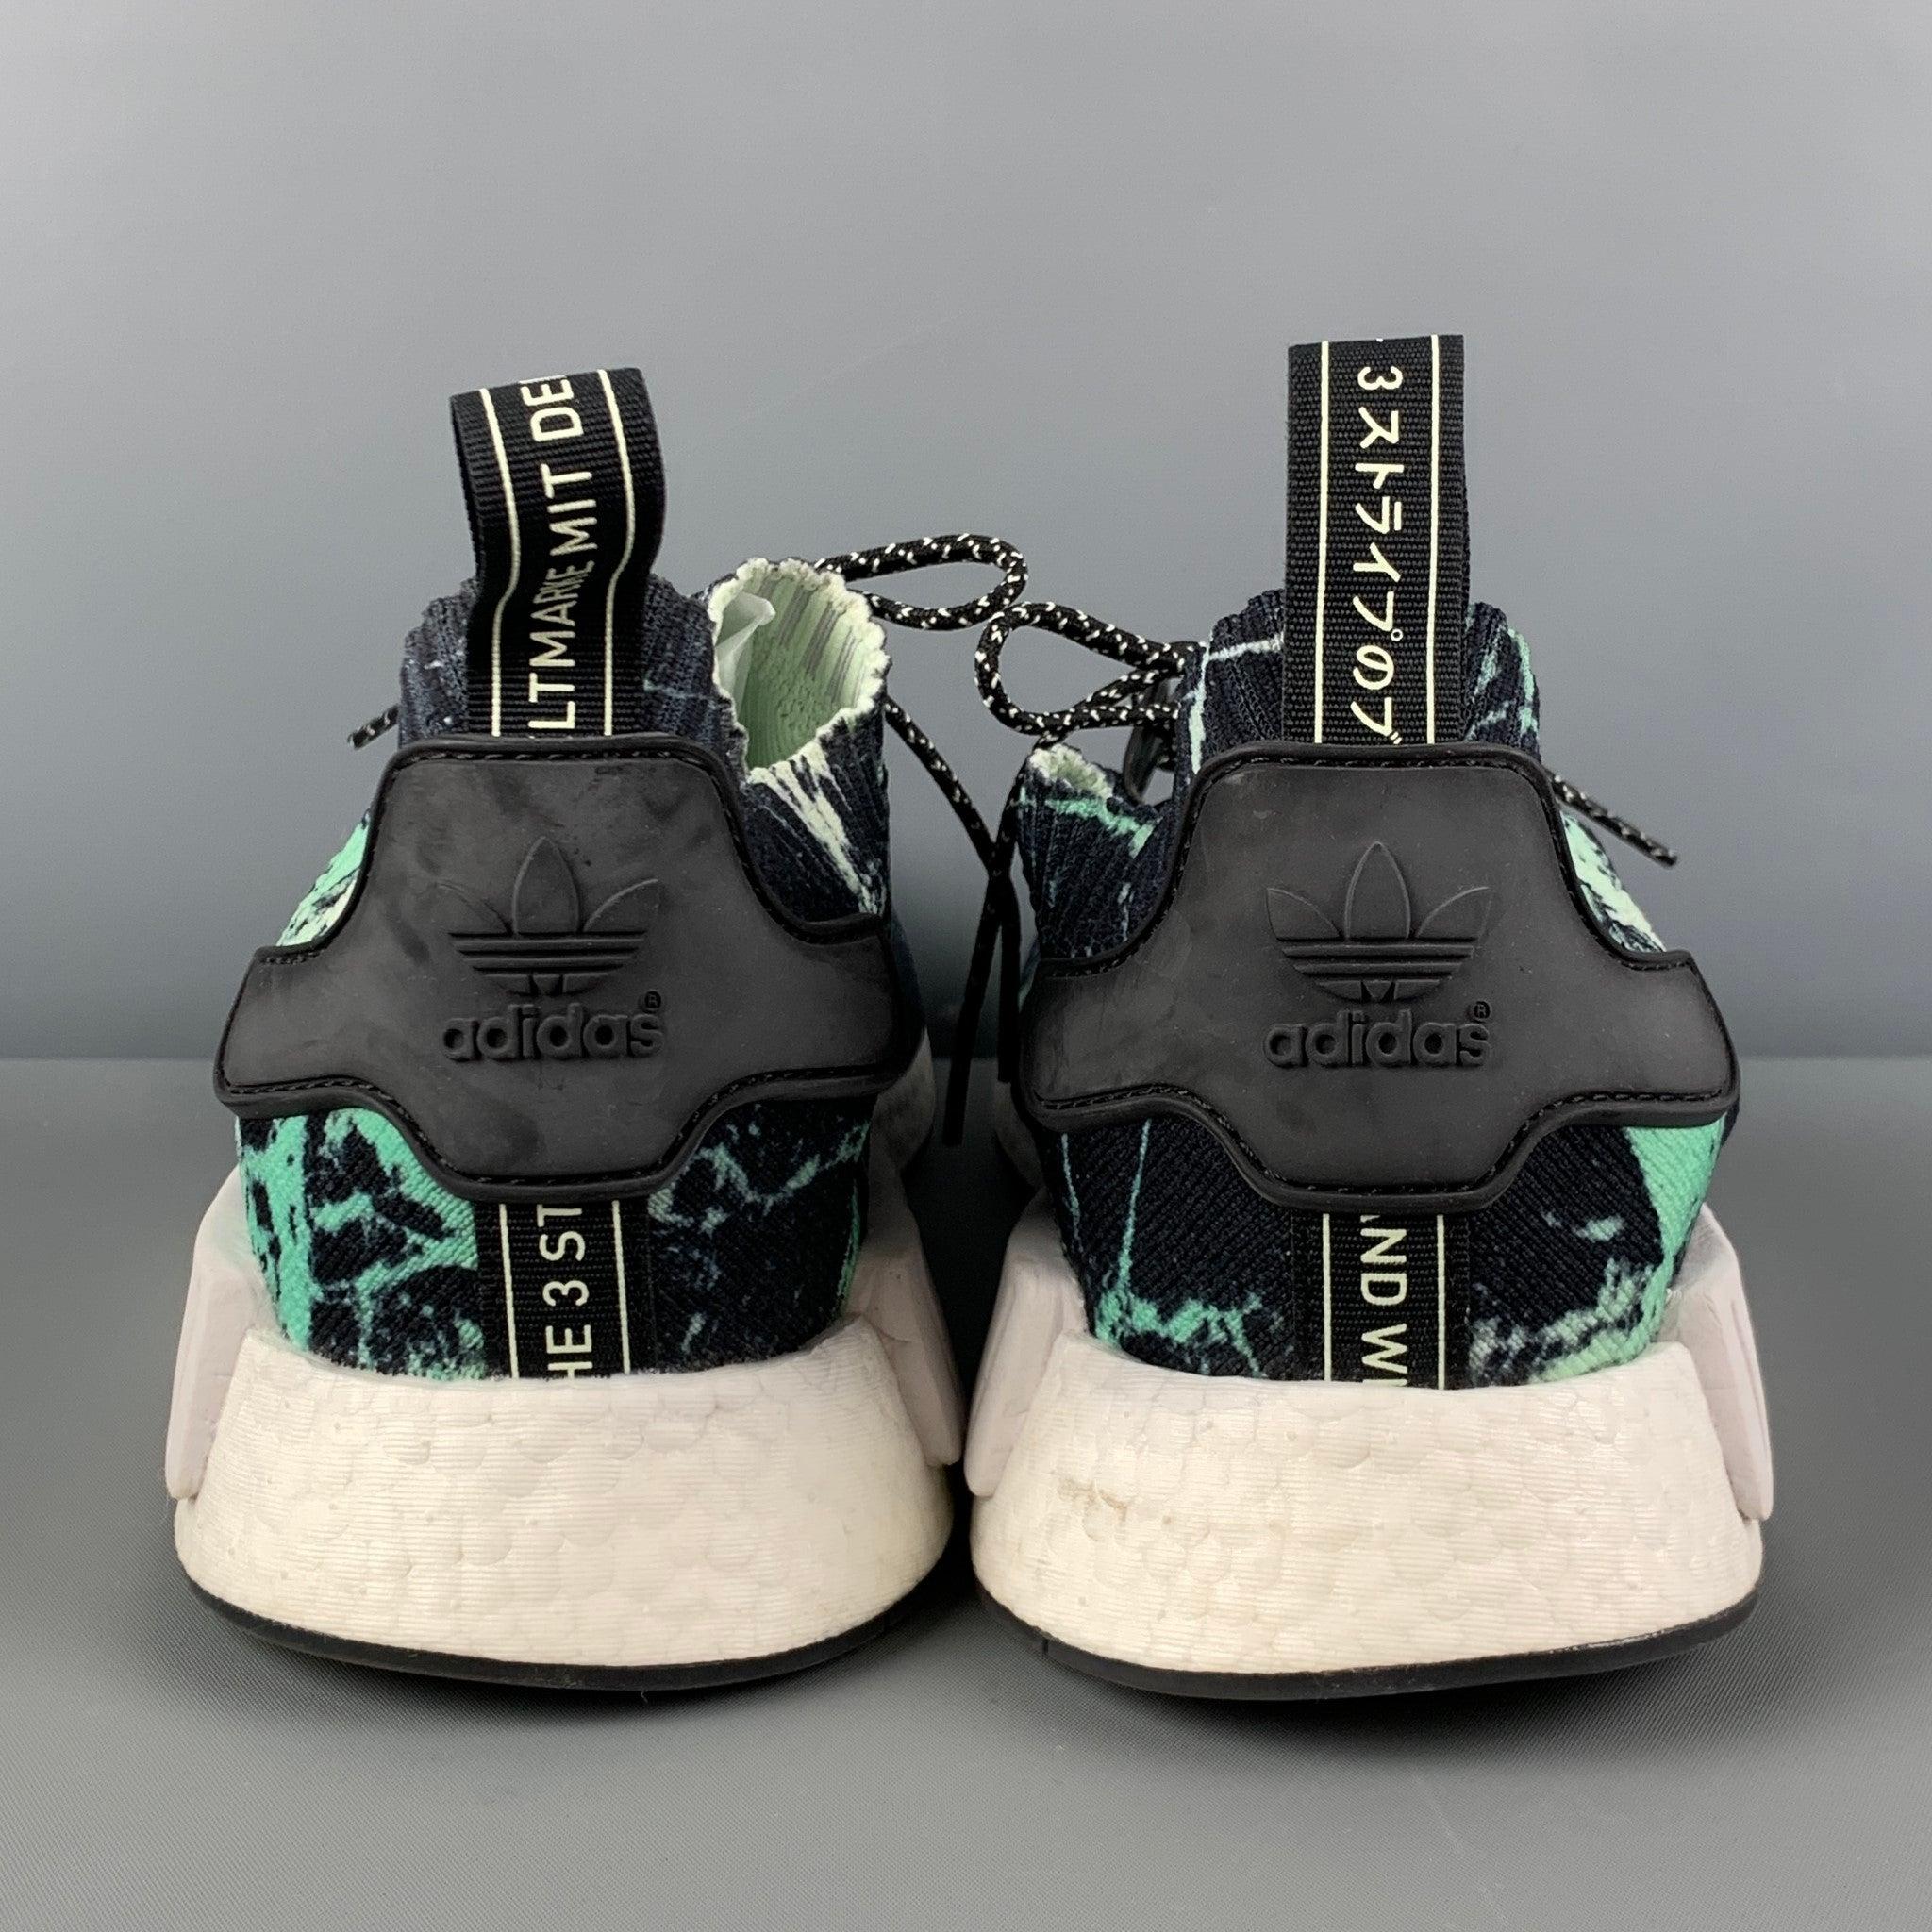 ADIDAS NMD R1 PK Size 12.5 Black Green Splattered Nylon Lace Up Sneakers For Sale 1